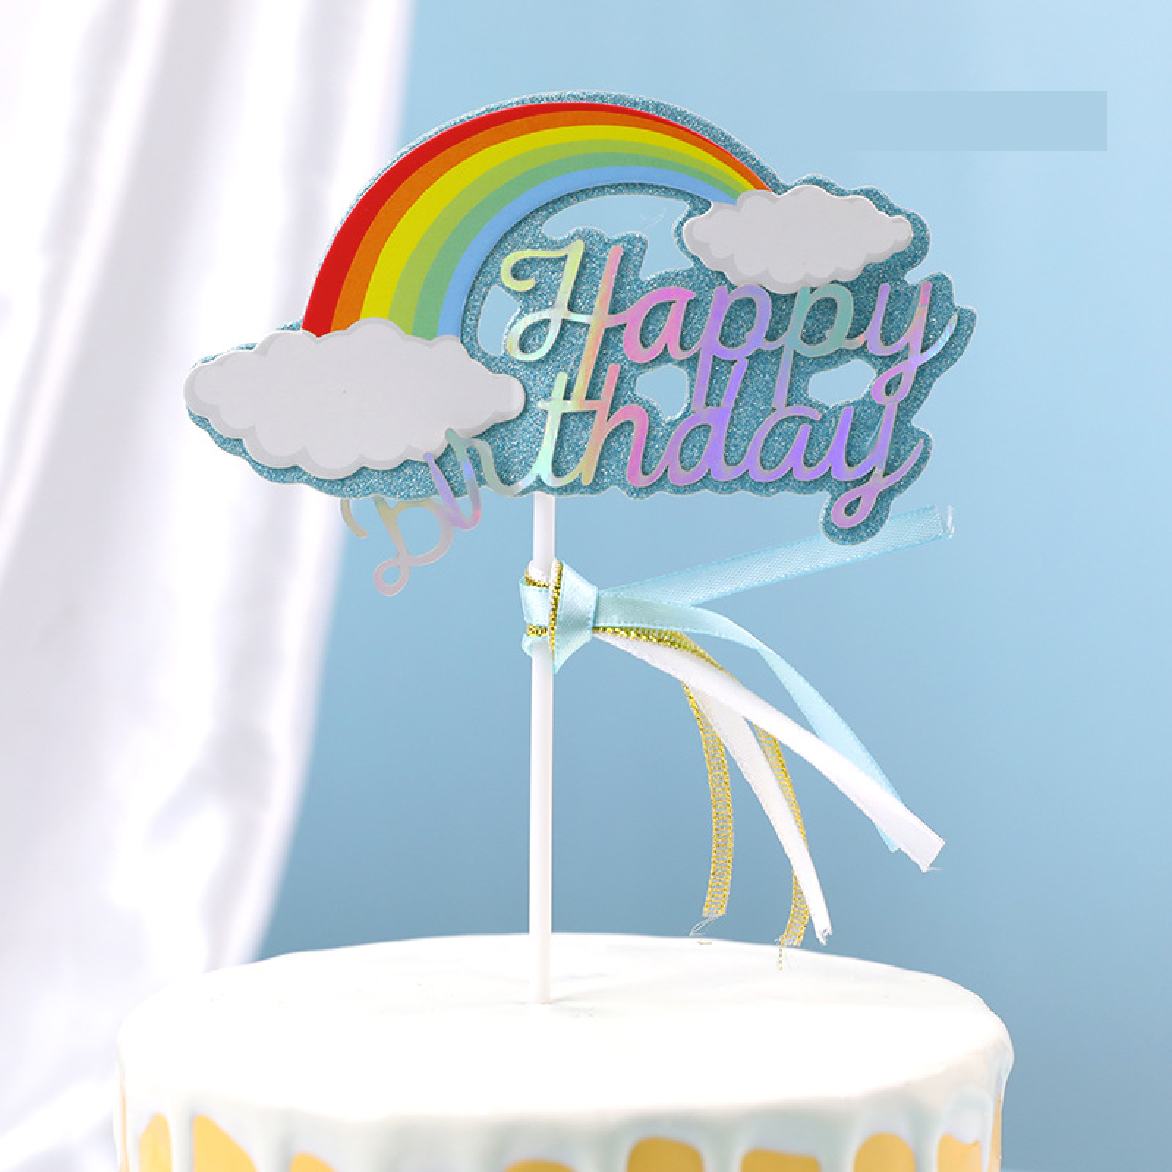 Cake Topper Cake Decoration - 'Happy Birthday' with rainbow, cloud and tassels - blue - Rampant Coffee Company